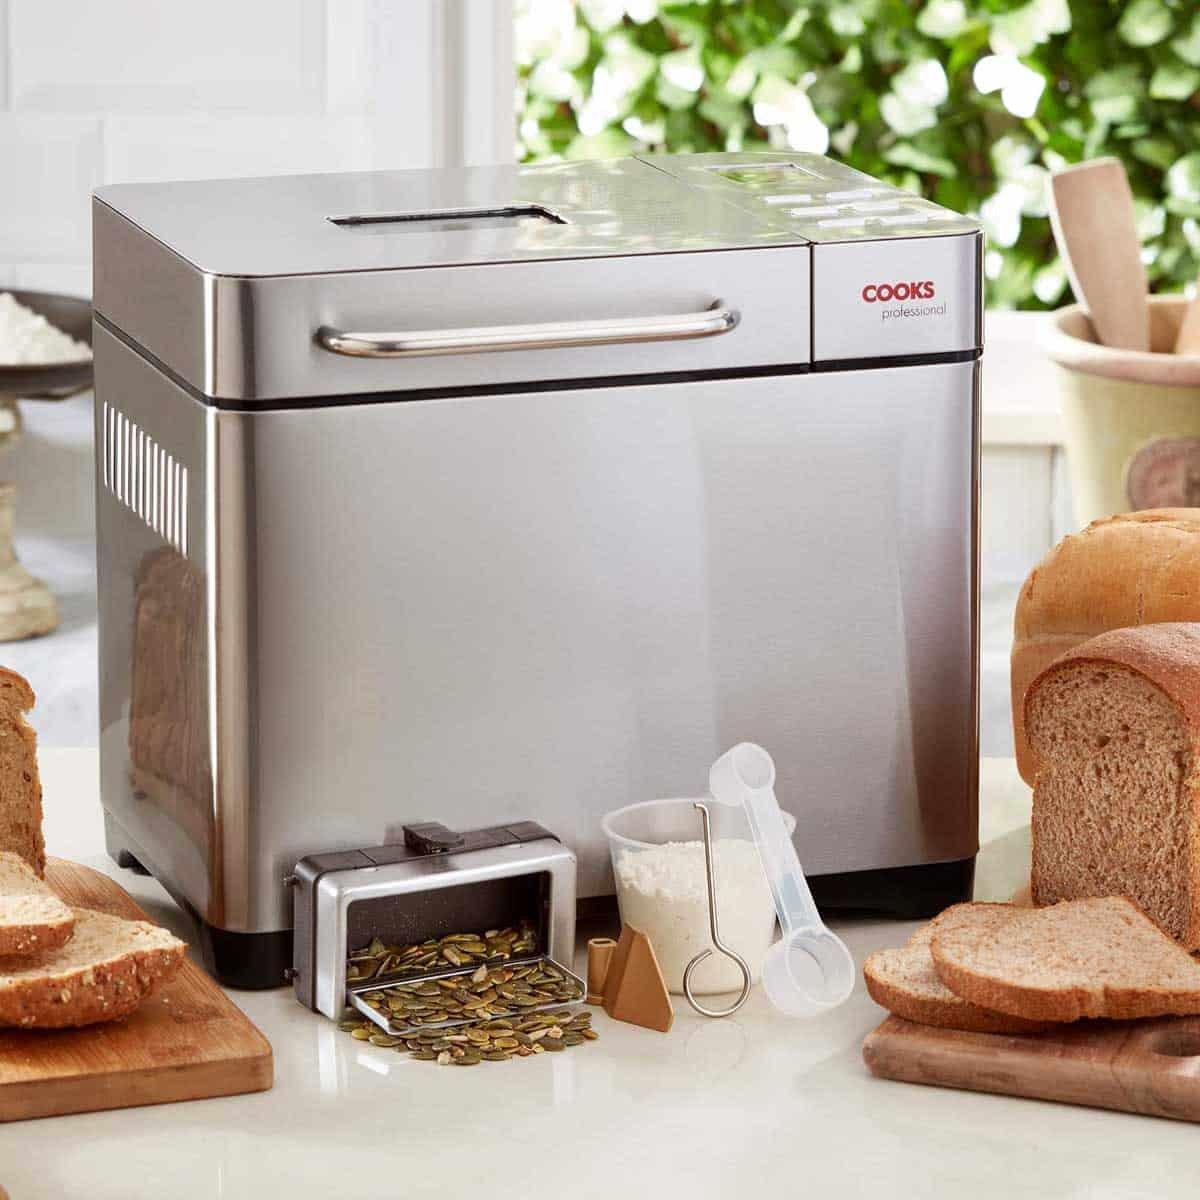 Cooks Professional G3271 Bread Maker With Fruit And Seed Dispenser - Silver